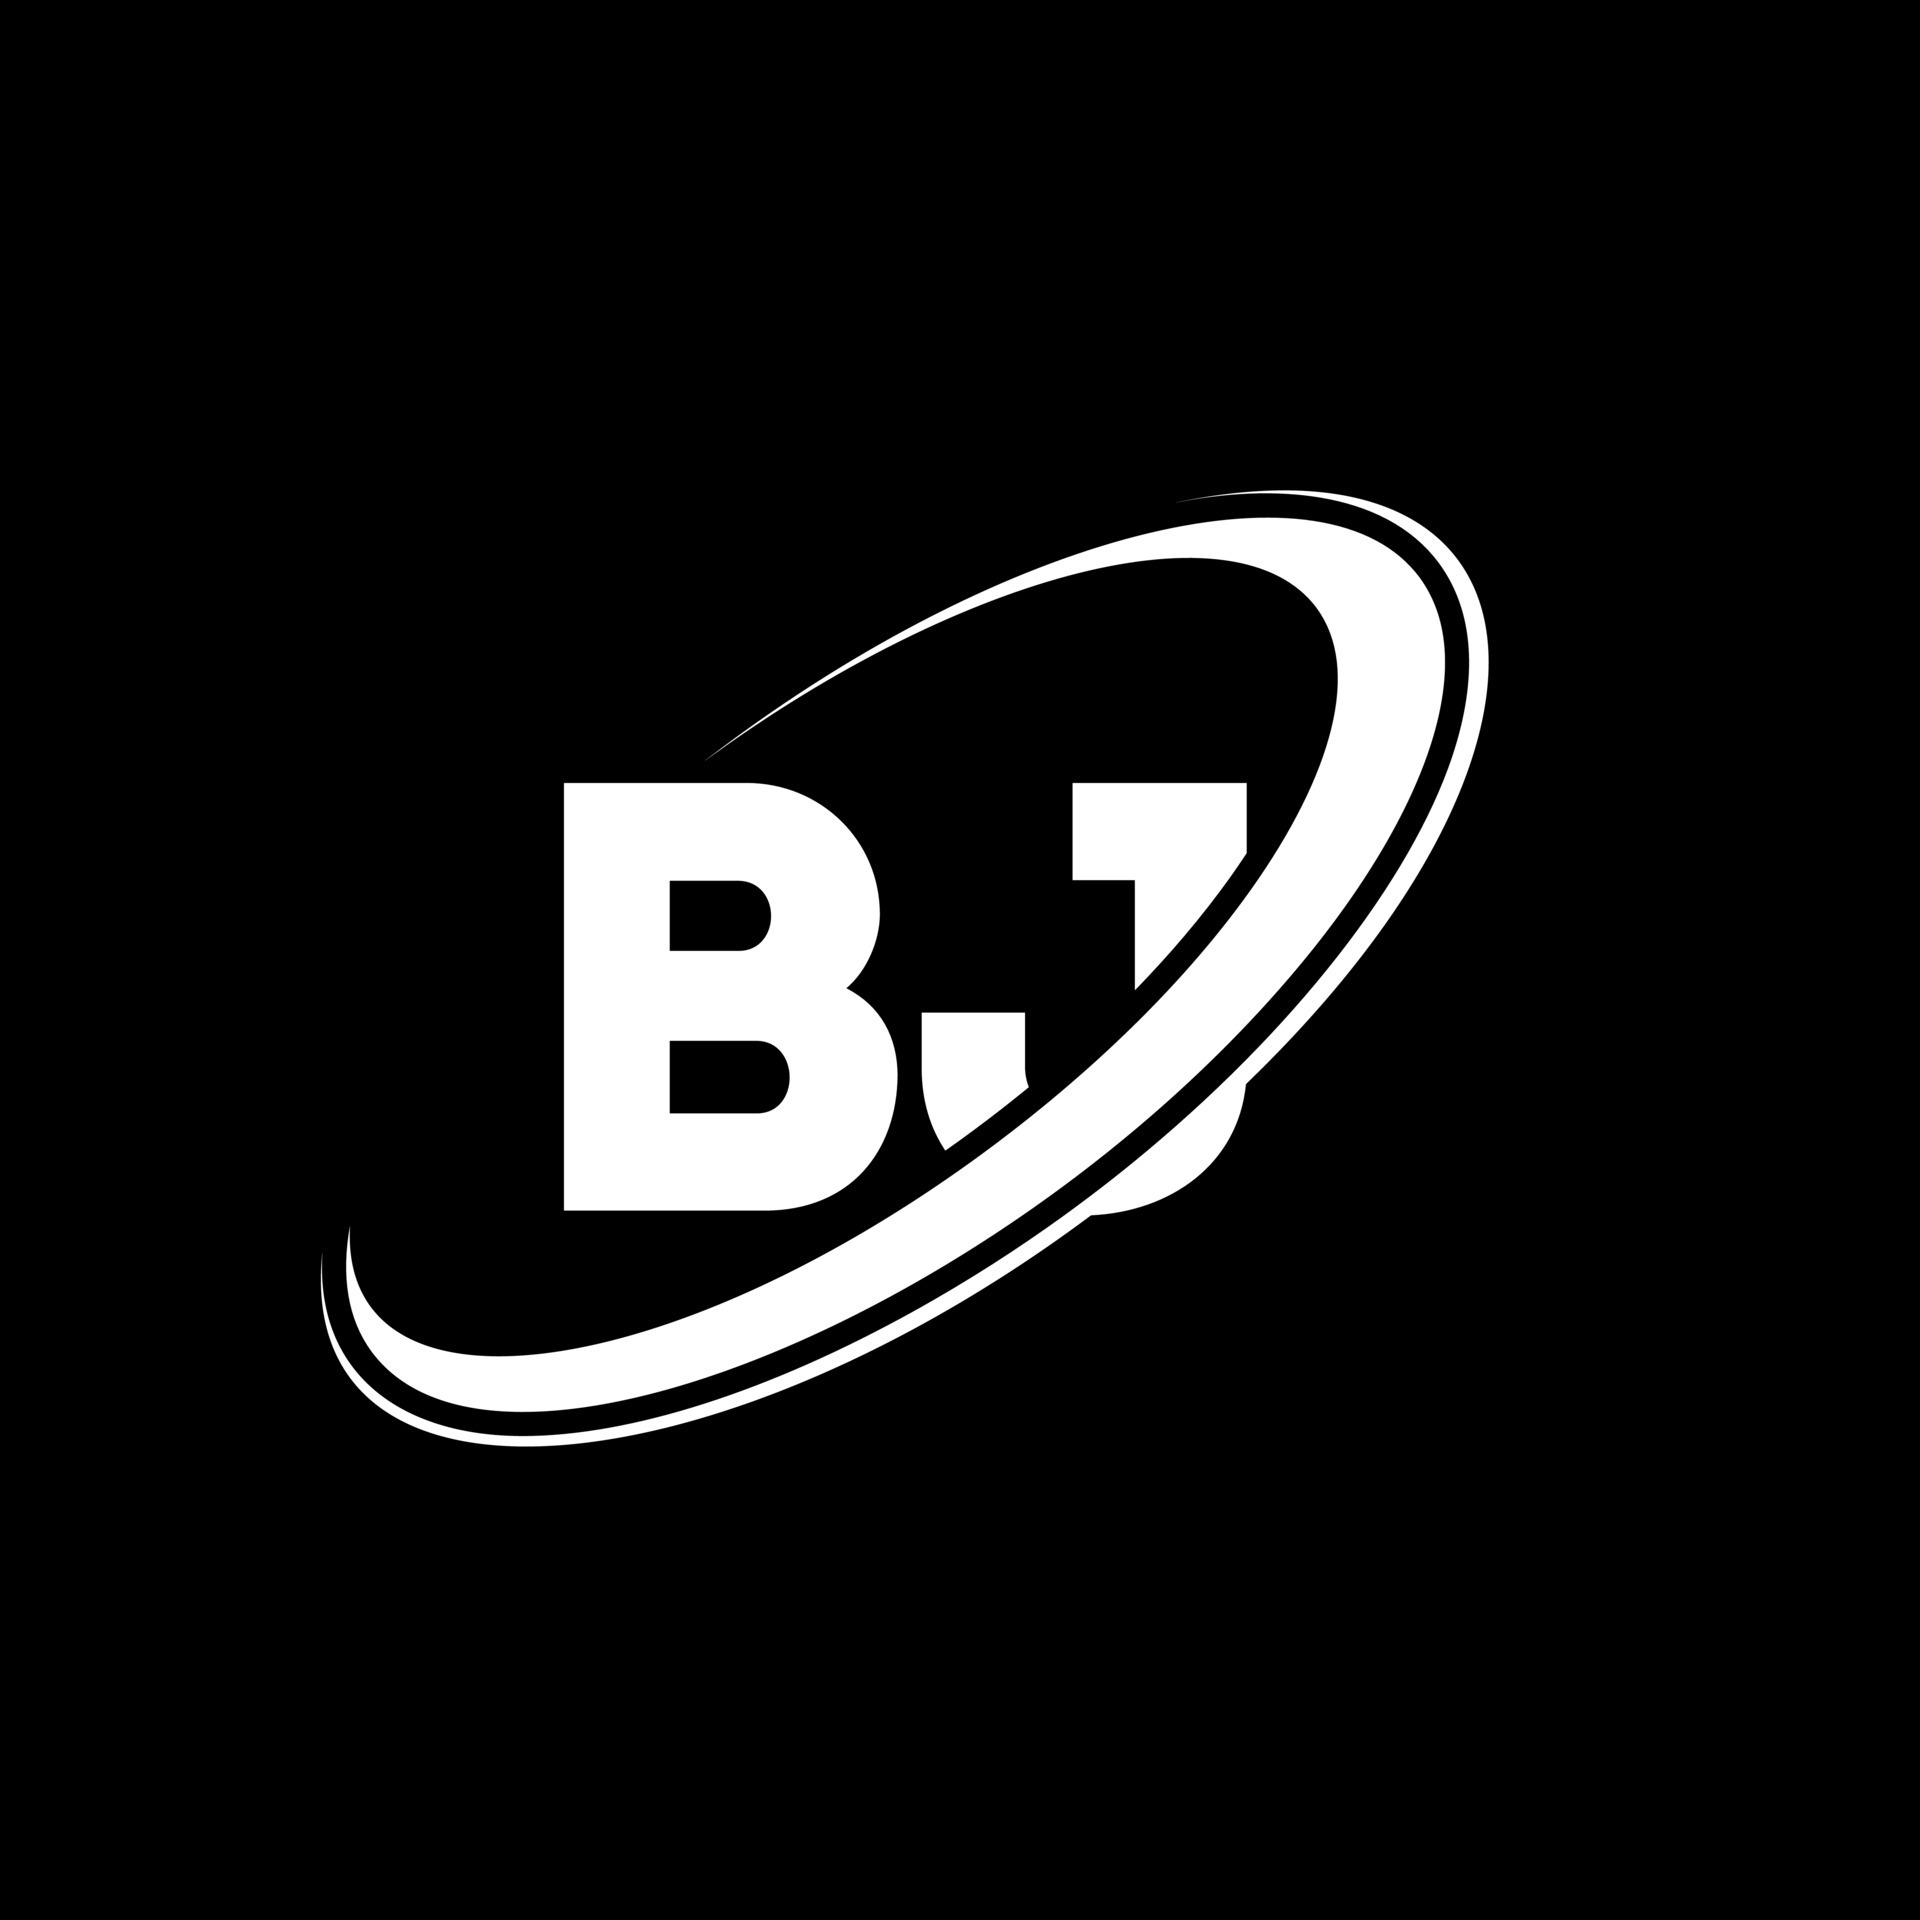 BJ Creative | Web design, logos, artwork and emails in Stamford